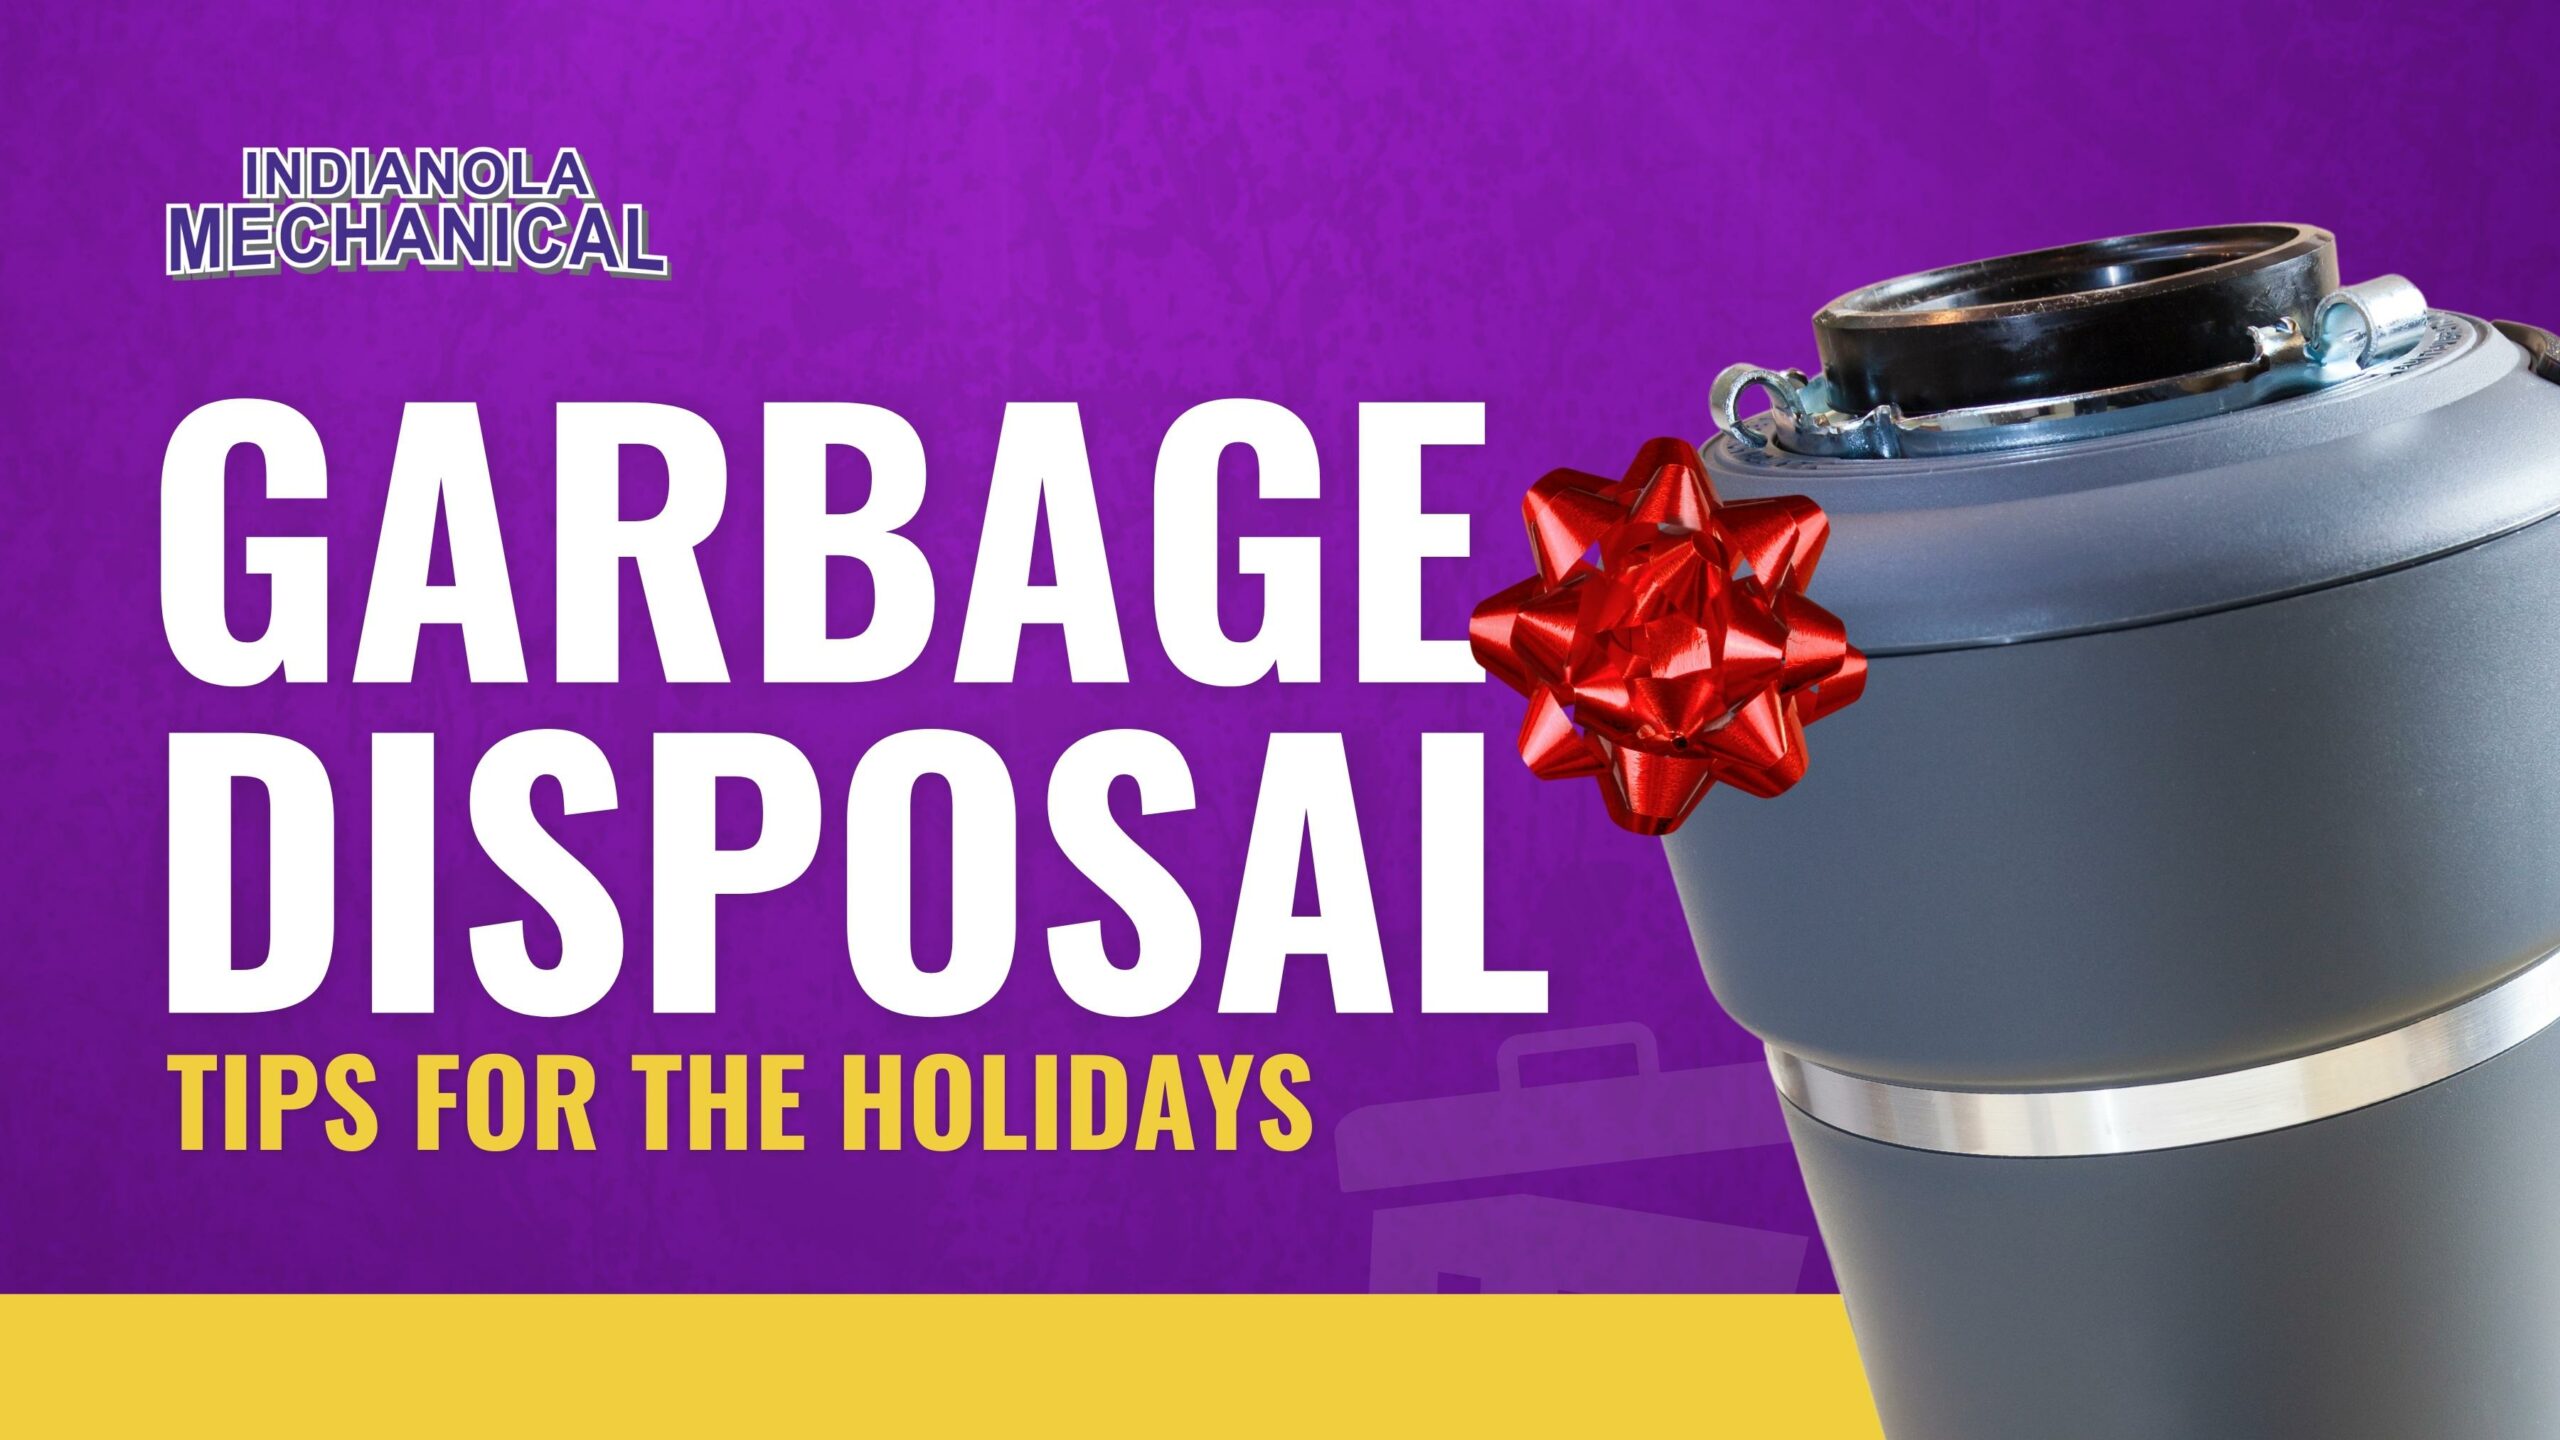 Your Garbage Disposal & The Holidays Indianola Mechanical